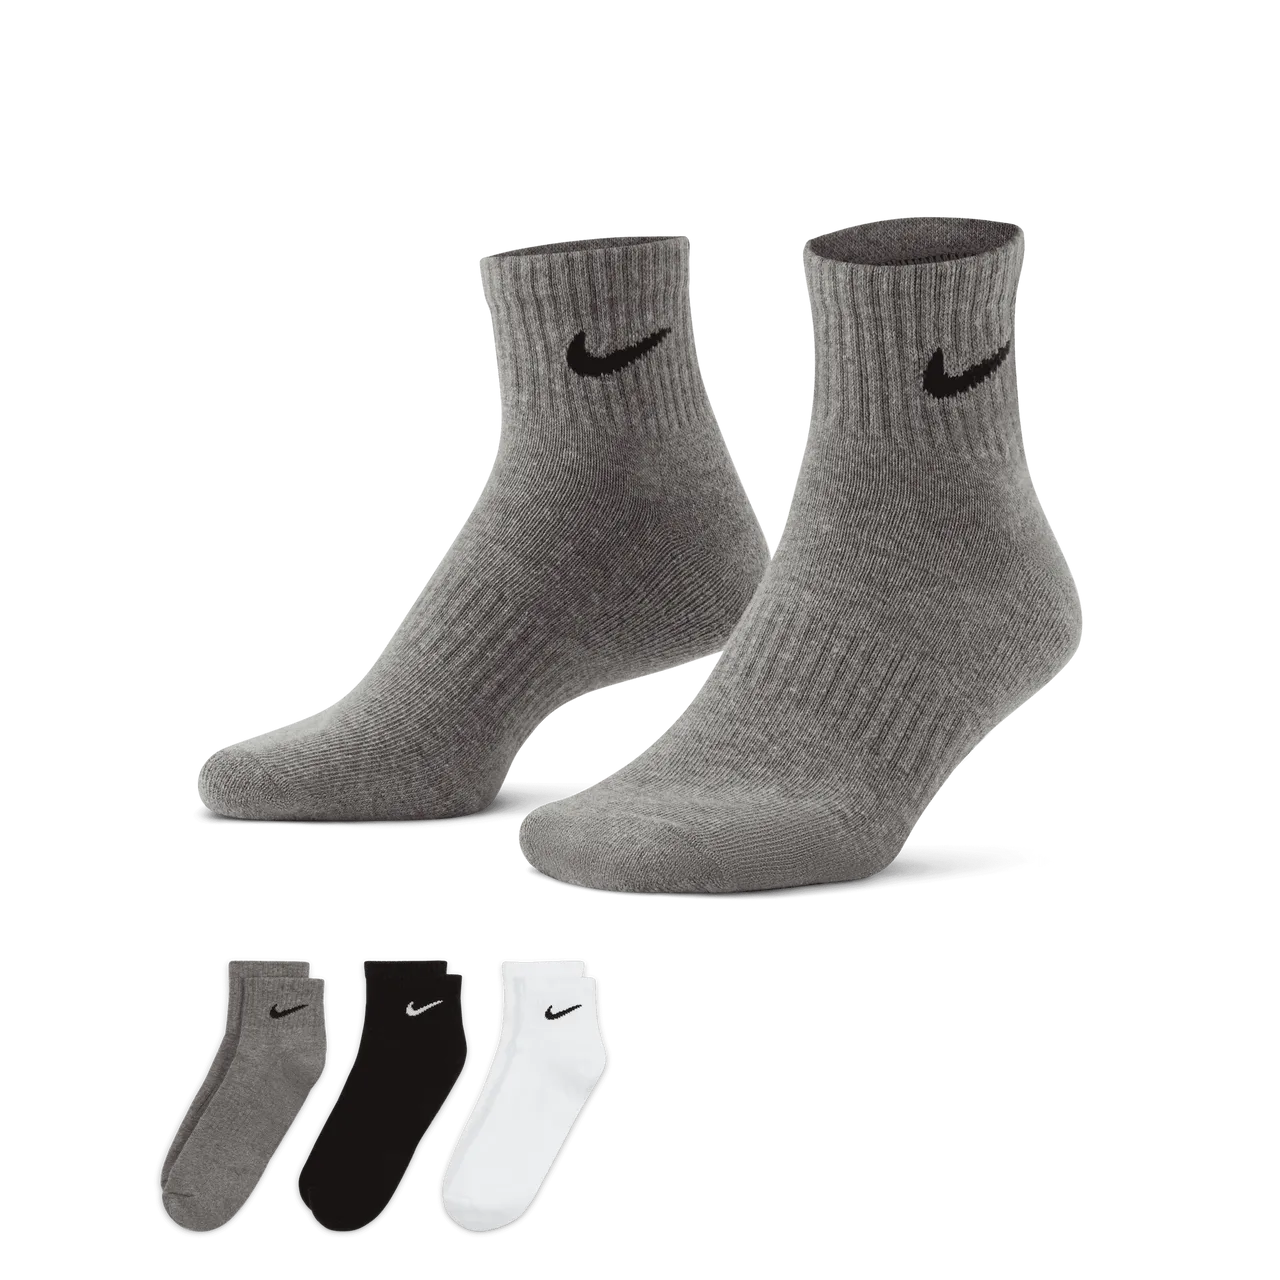 Nike Everyday Cushioned Training Ankle Socks (3 Pairs) - Multi-Colour - Polyester